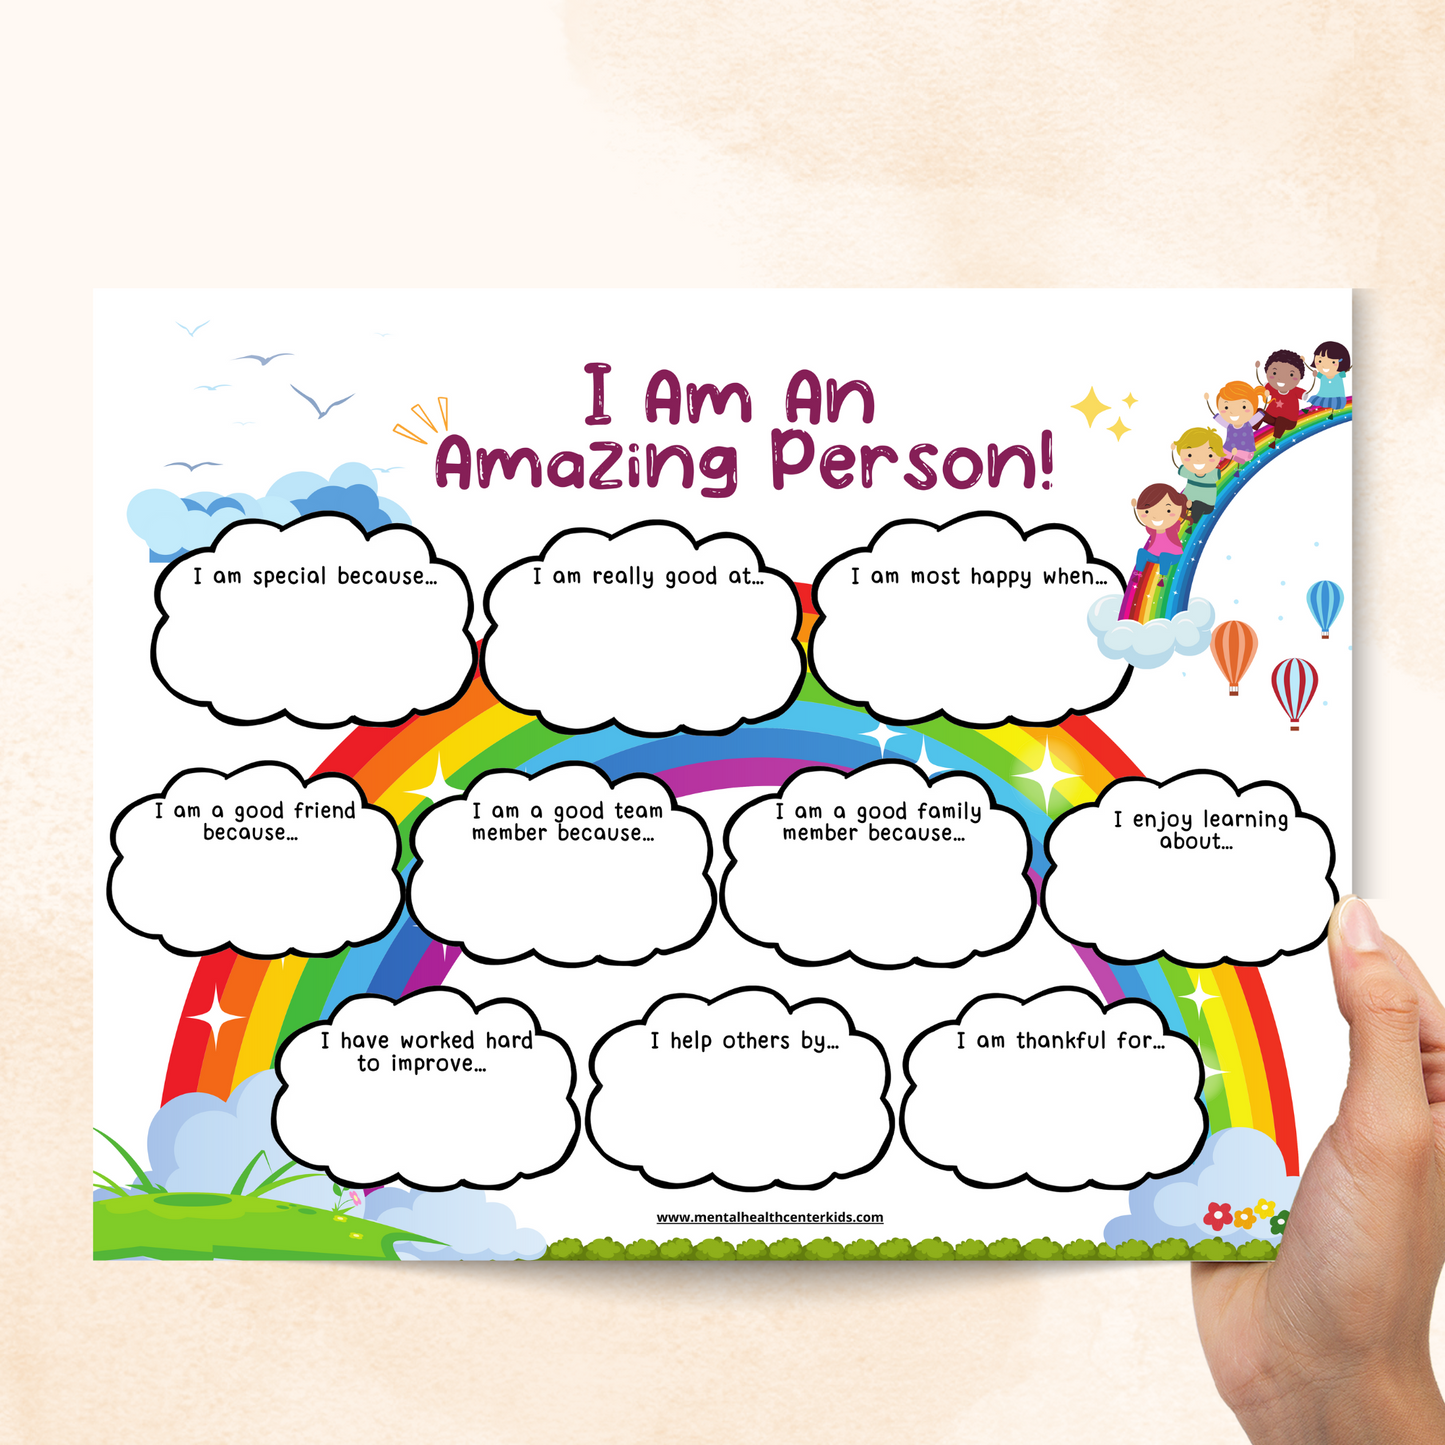 "I Am an Amazing Person" Worksheet